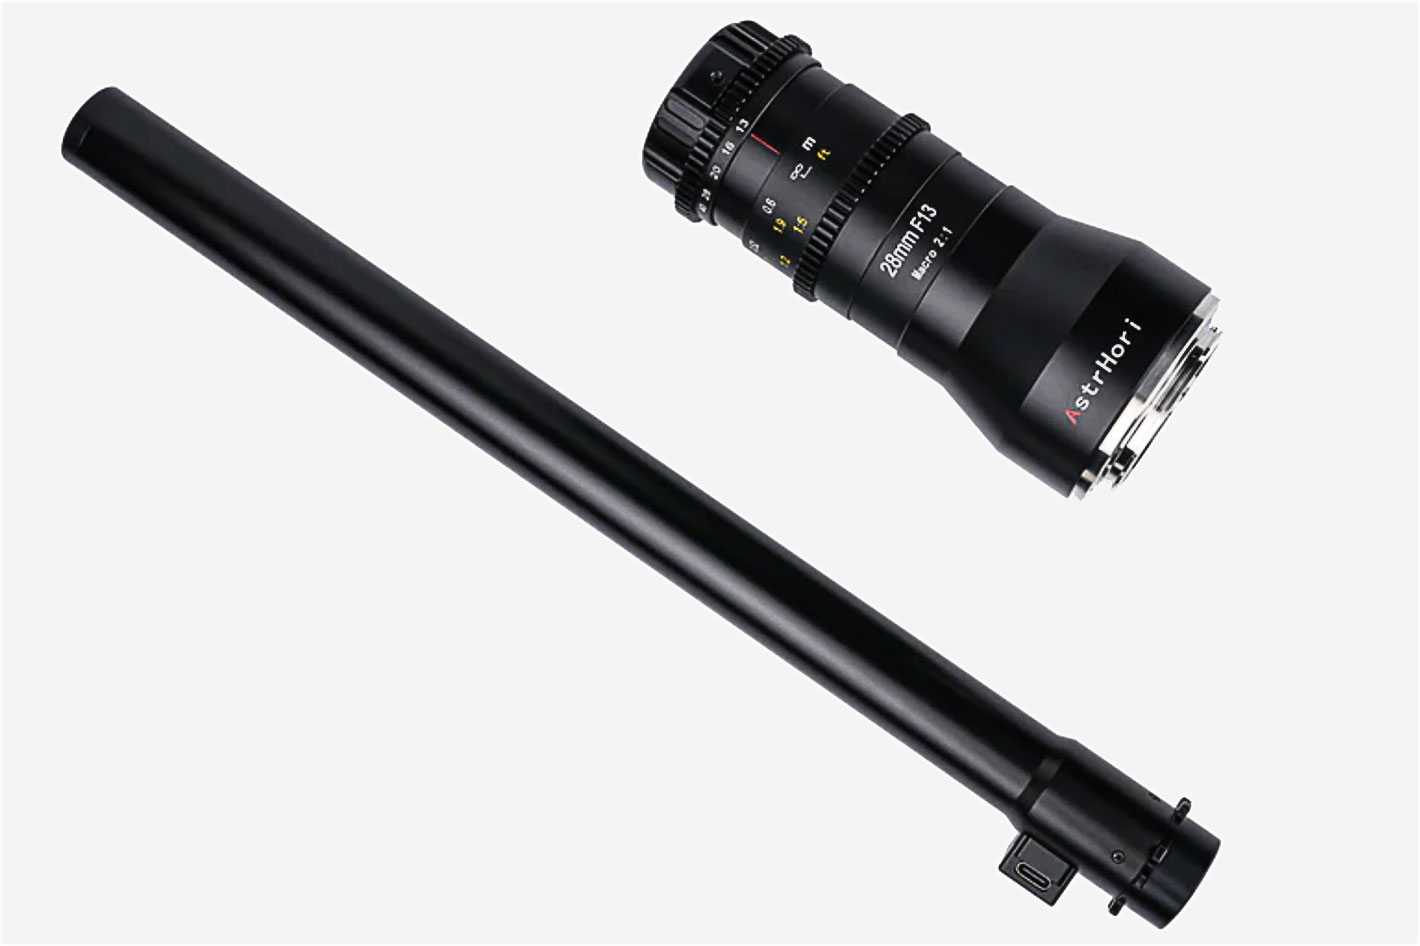 AstrHori 18mm F8 2X: the world's first probe macro lens for APS-C